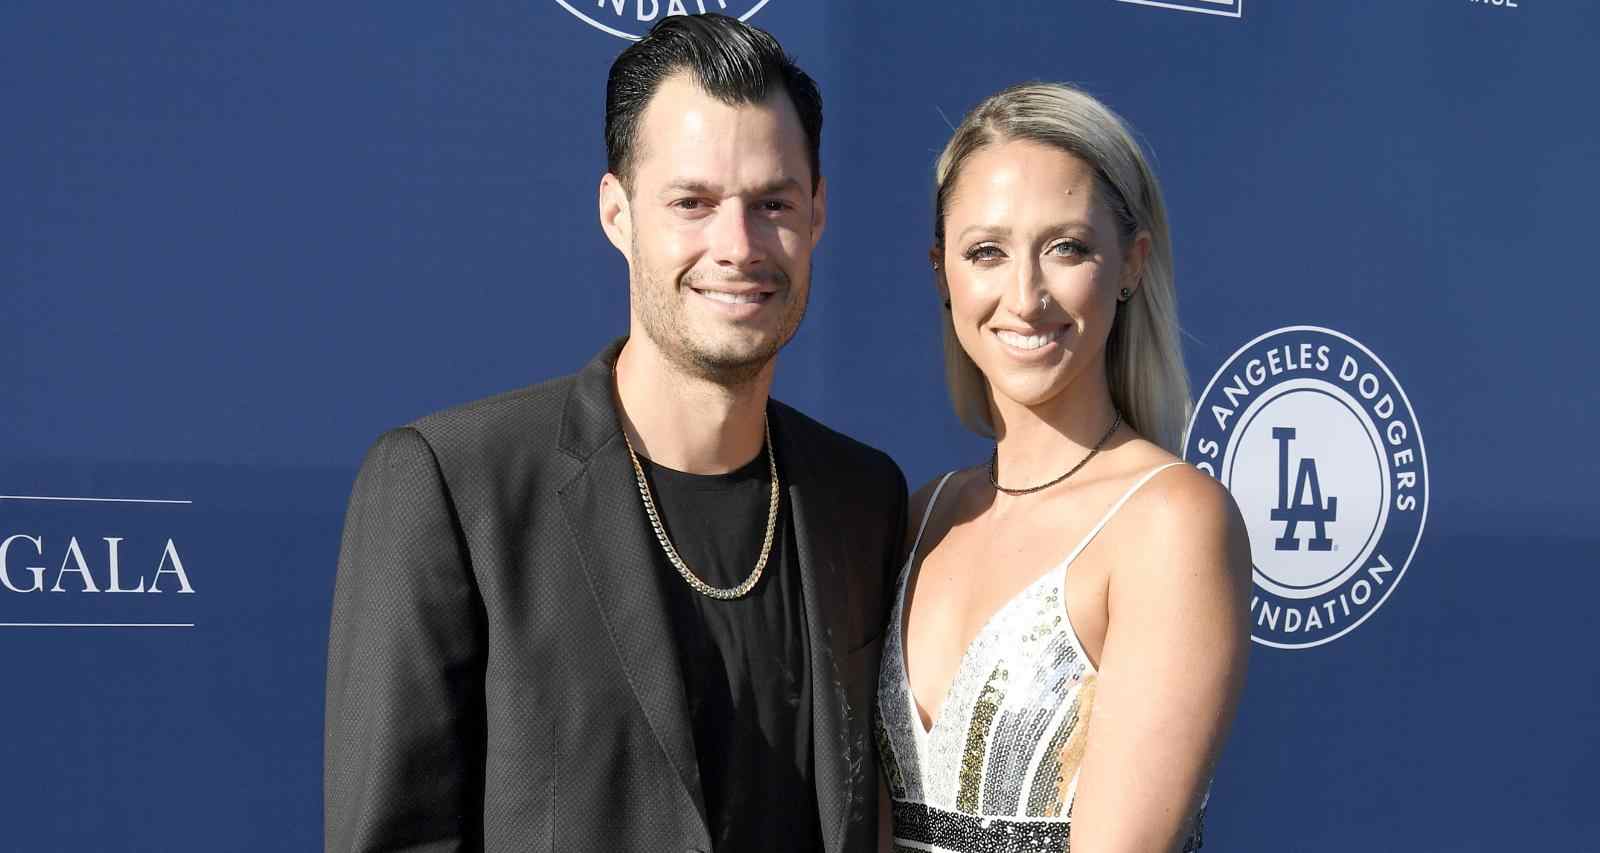 Ashley Parks Kelly Wiki, Age, Family, Kids, Parents, Education, How They Met, Wedding, Career and Facts About MLB Pitcher, Joe Kelly’s Wife